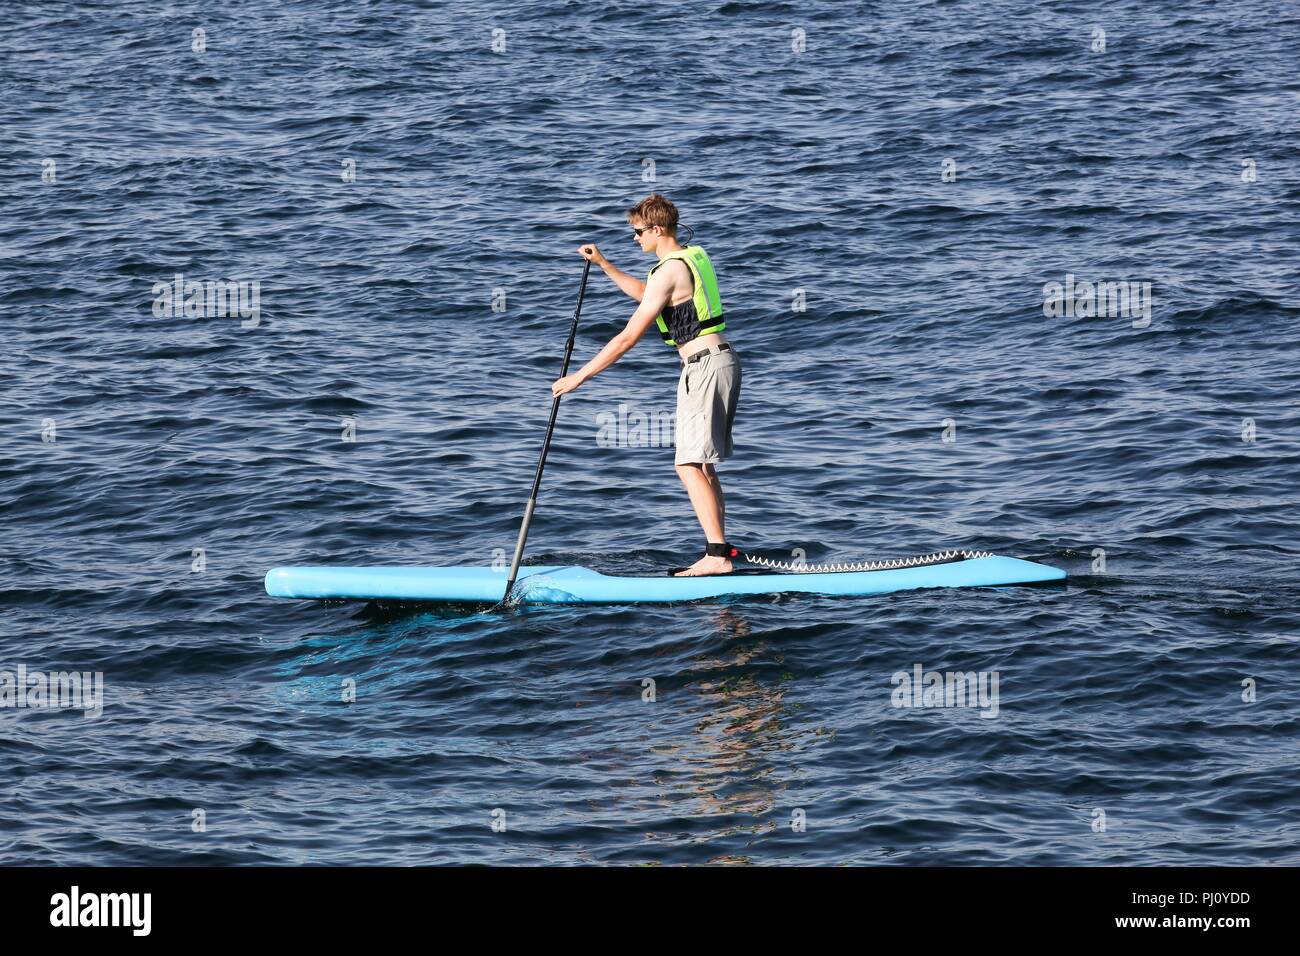 Aarhus, Denmark - August 7, 2018: Young man stand up paddle boards on the sea Stock Photo